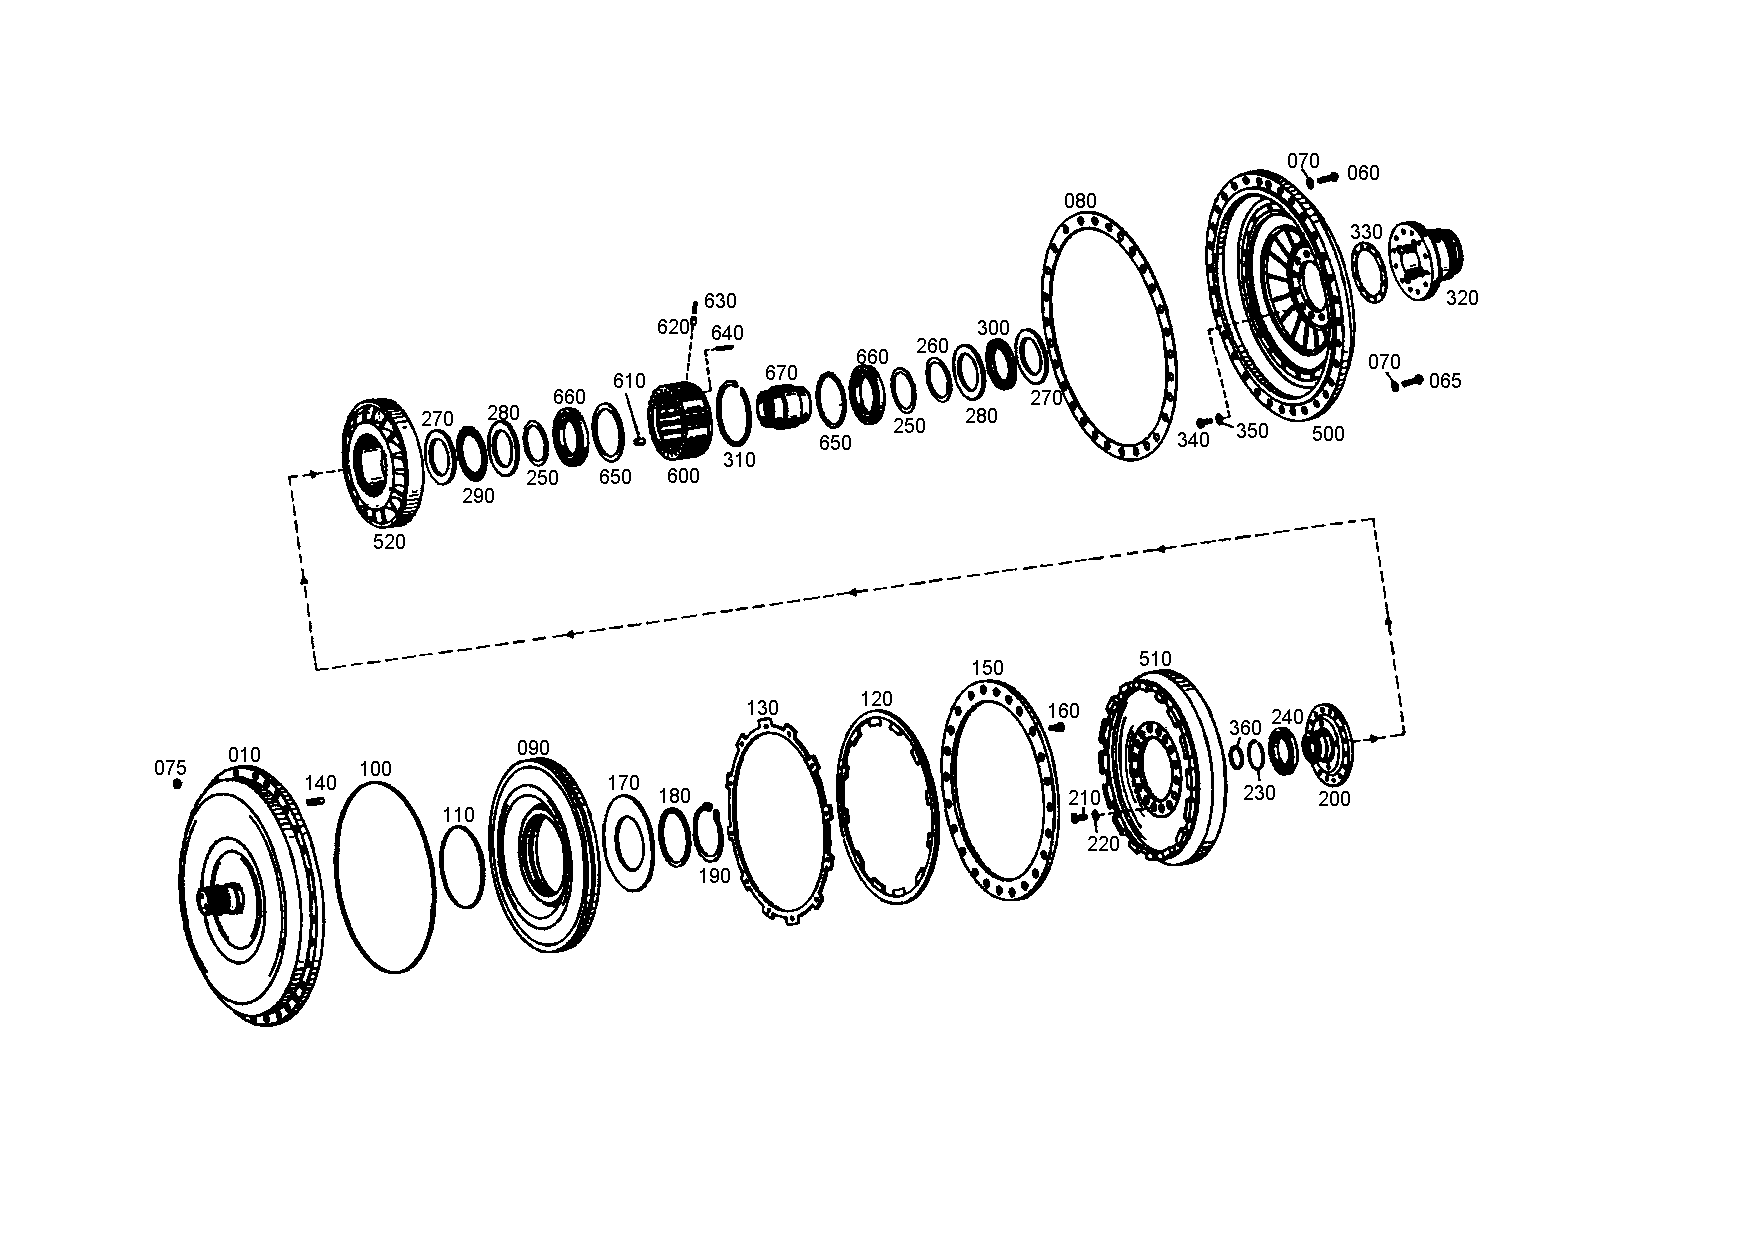 drawing for MOXY TRUCKS AS 052540 - CUP SPRING (figure 3)